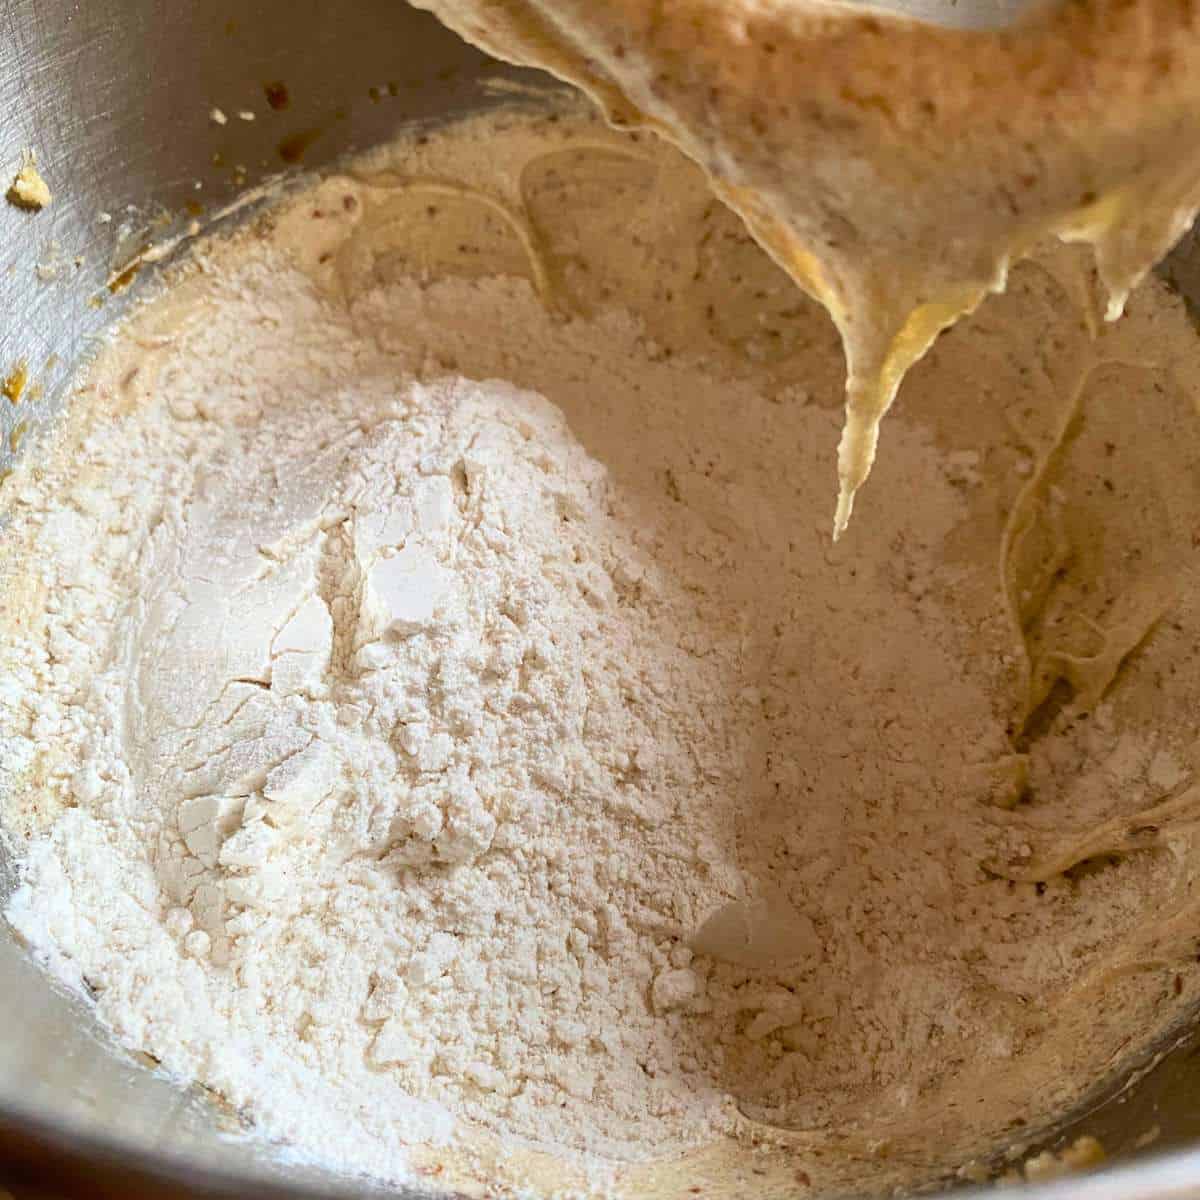 The gluten free flour mixture being added to the sugar and margarine mixture in a mixing bowl